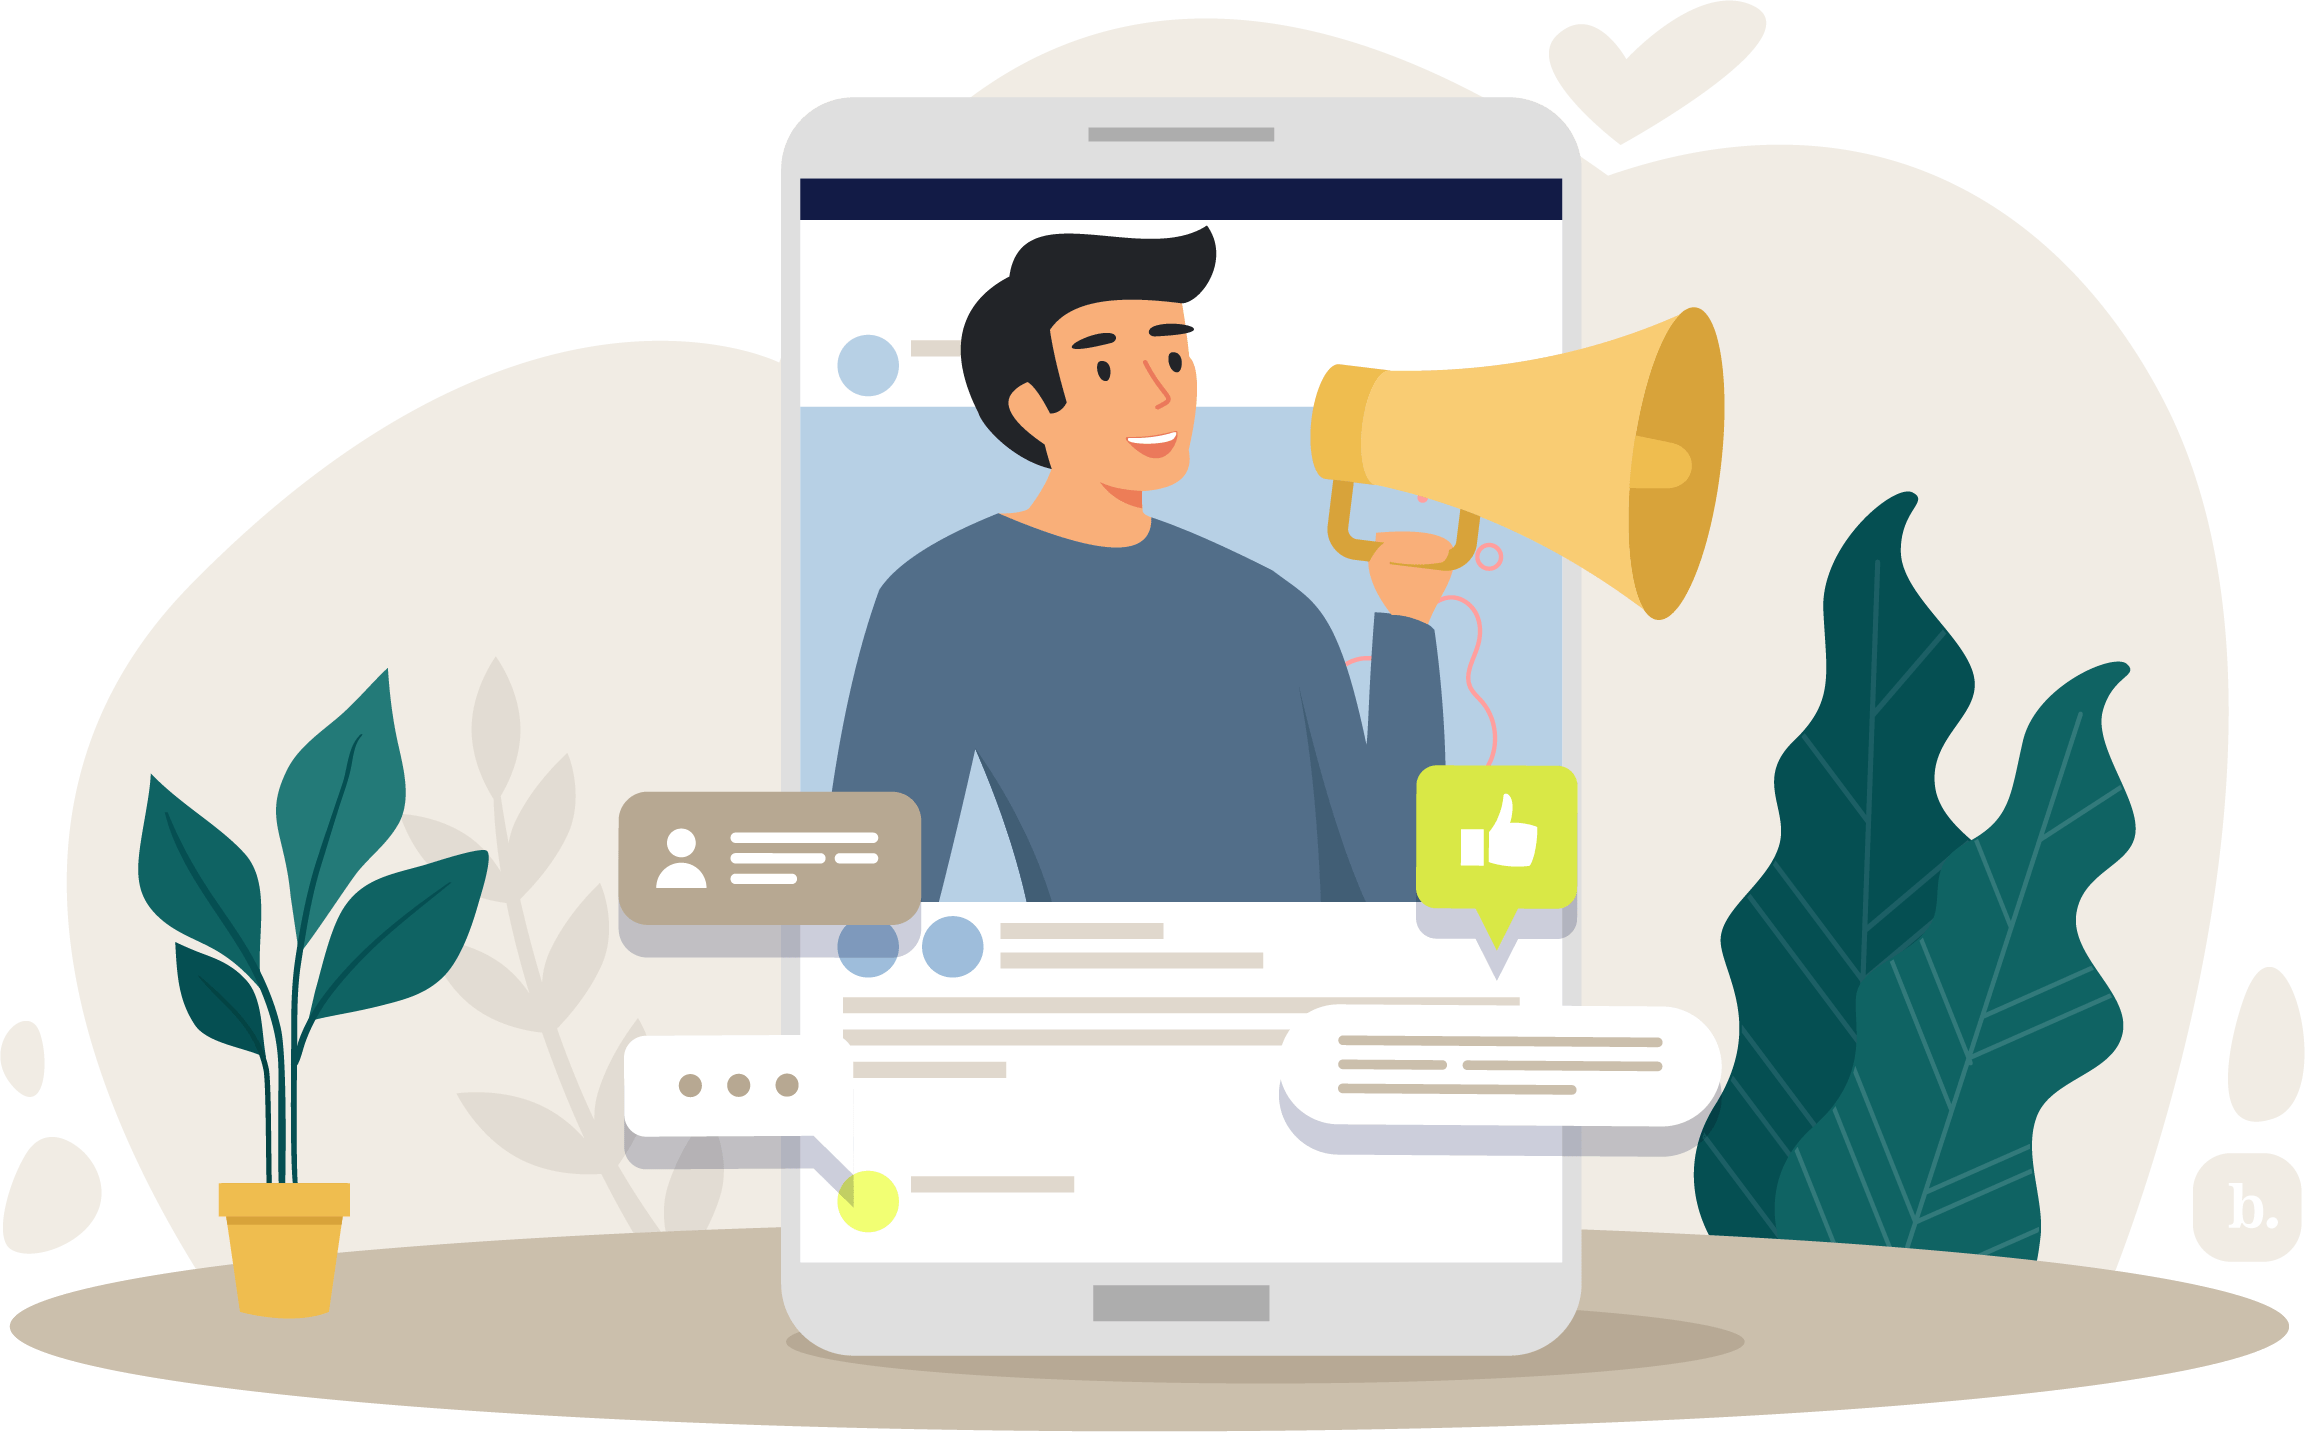 graphic of a person holding a megaphone within a social media window